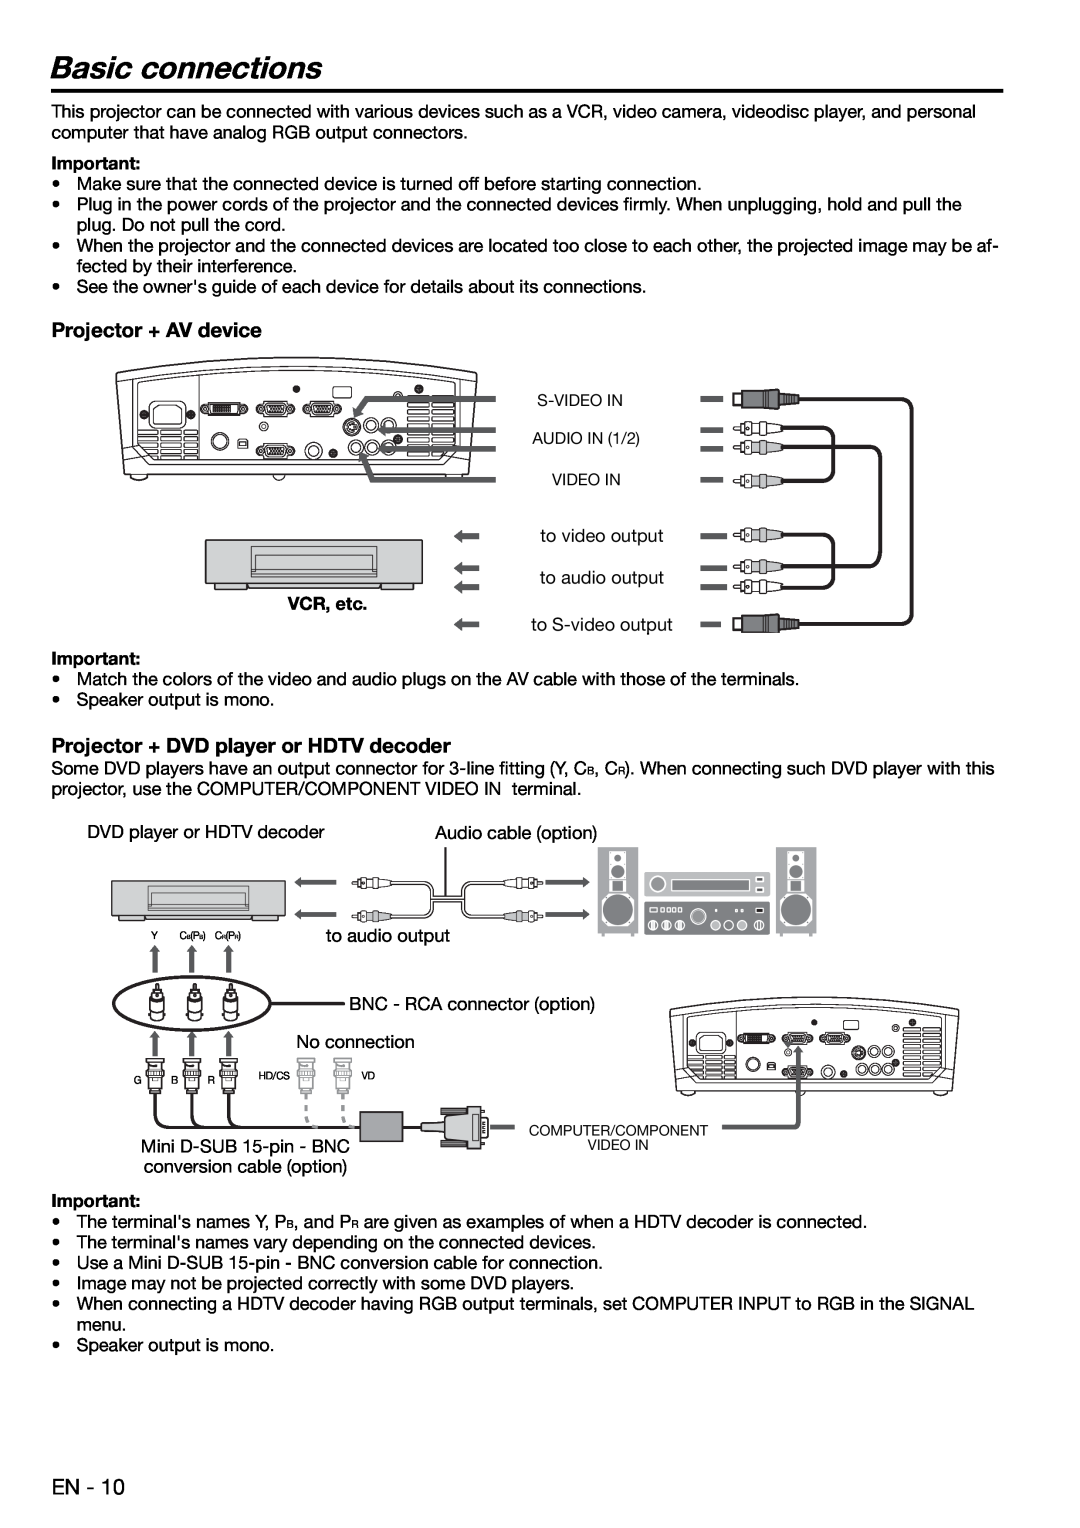 Mitsubishi Electronics XD480U user manual Basic connections, Projector + AV device, Projector + DVD player or HDTV decoder 